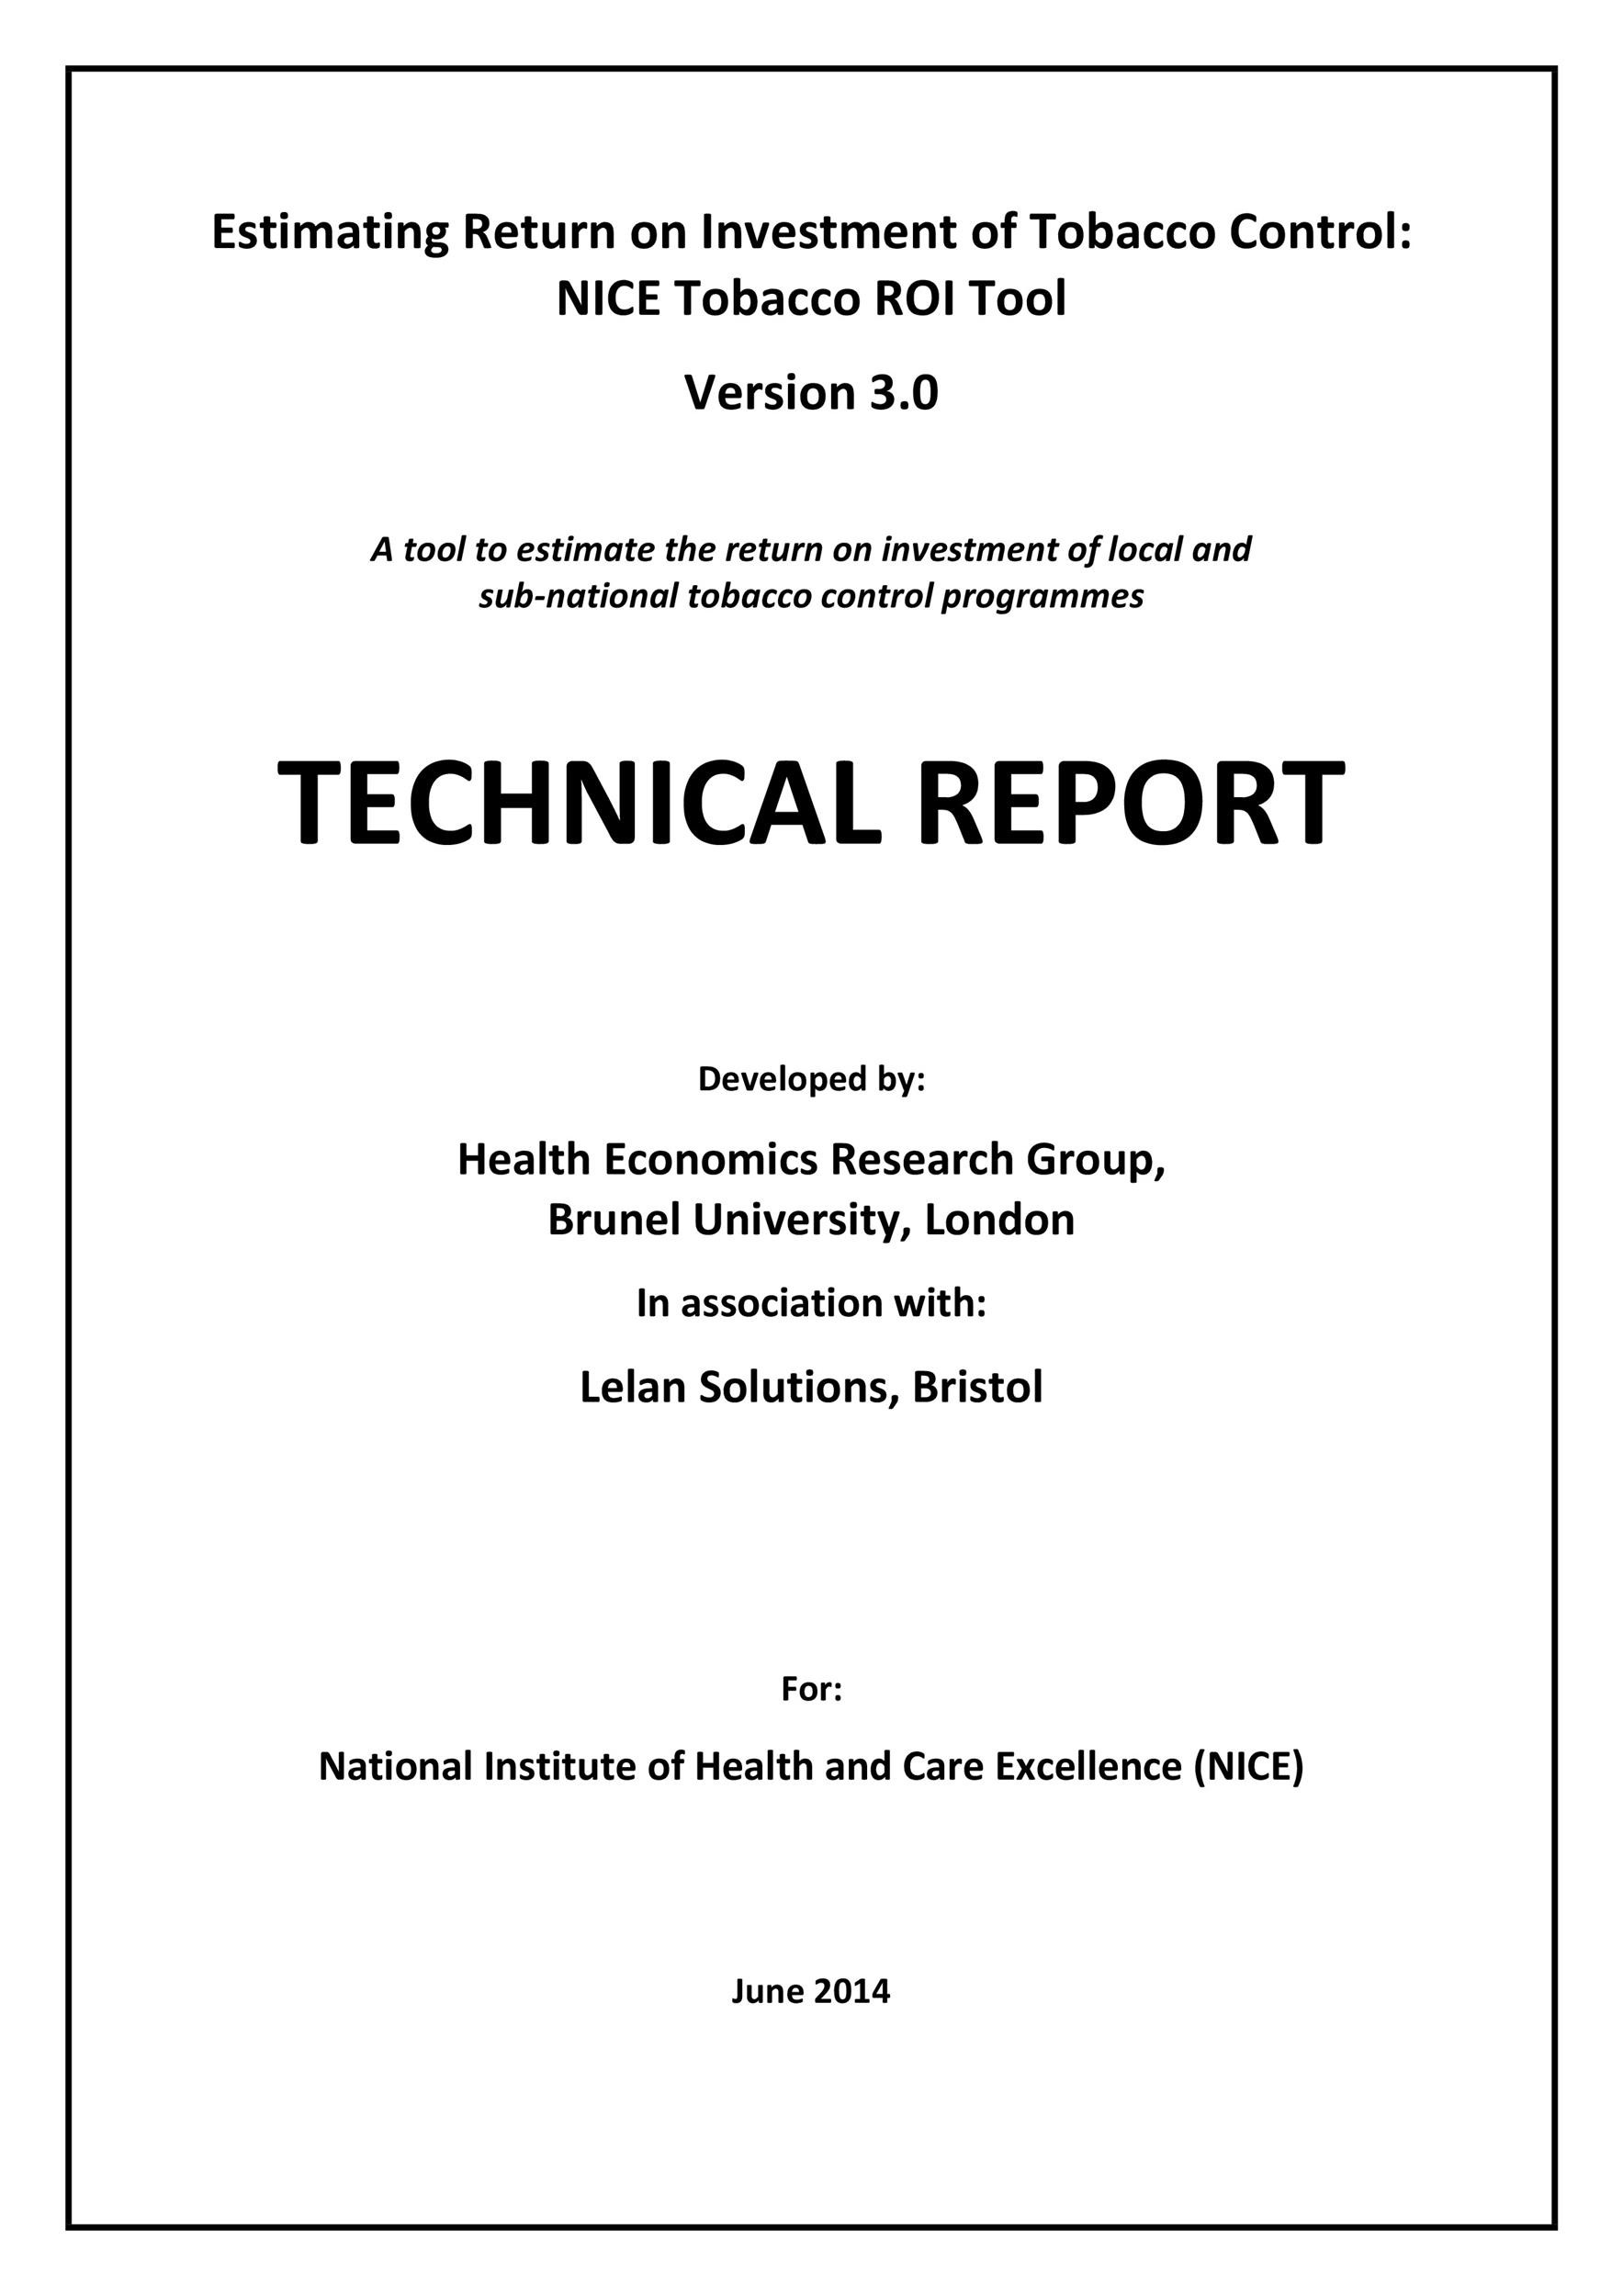 writing a technical report